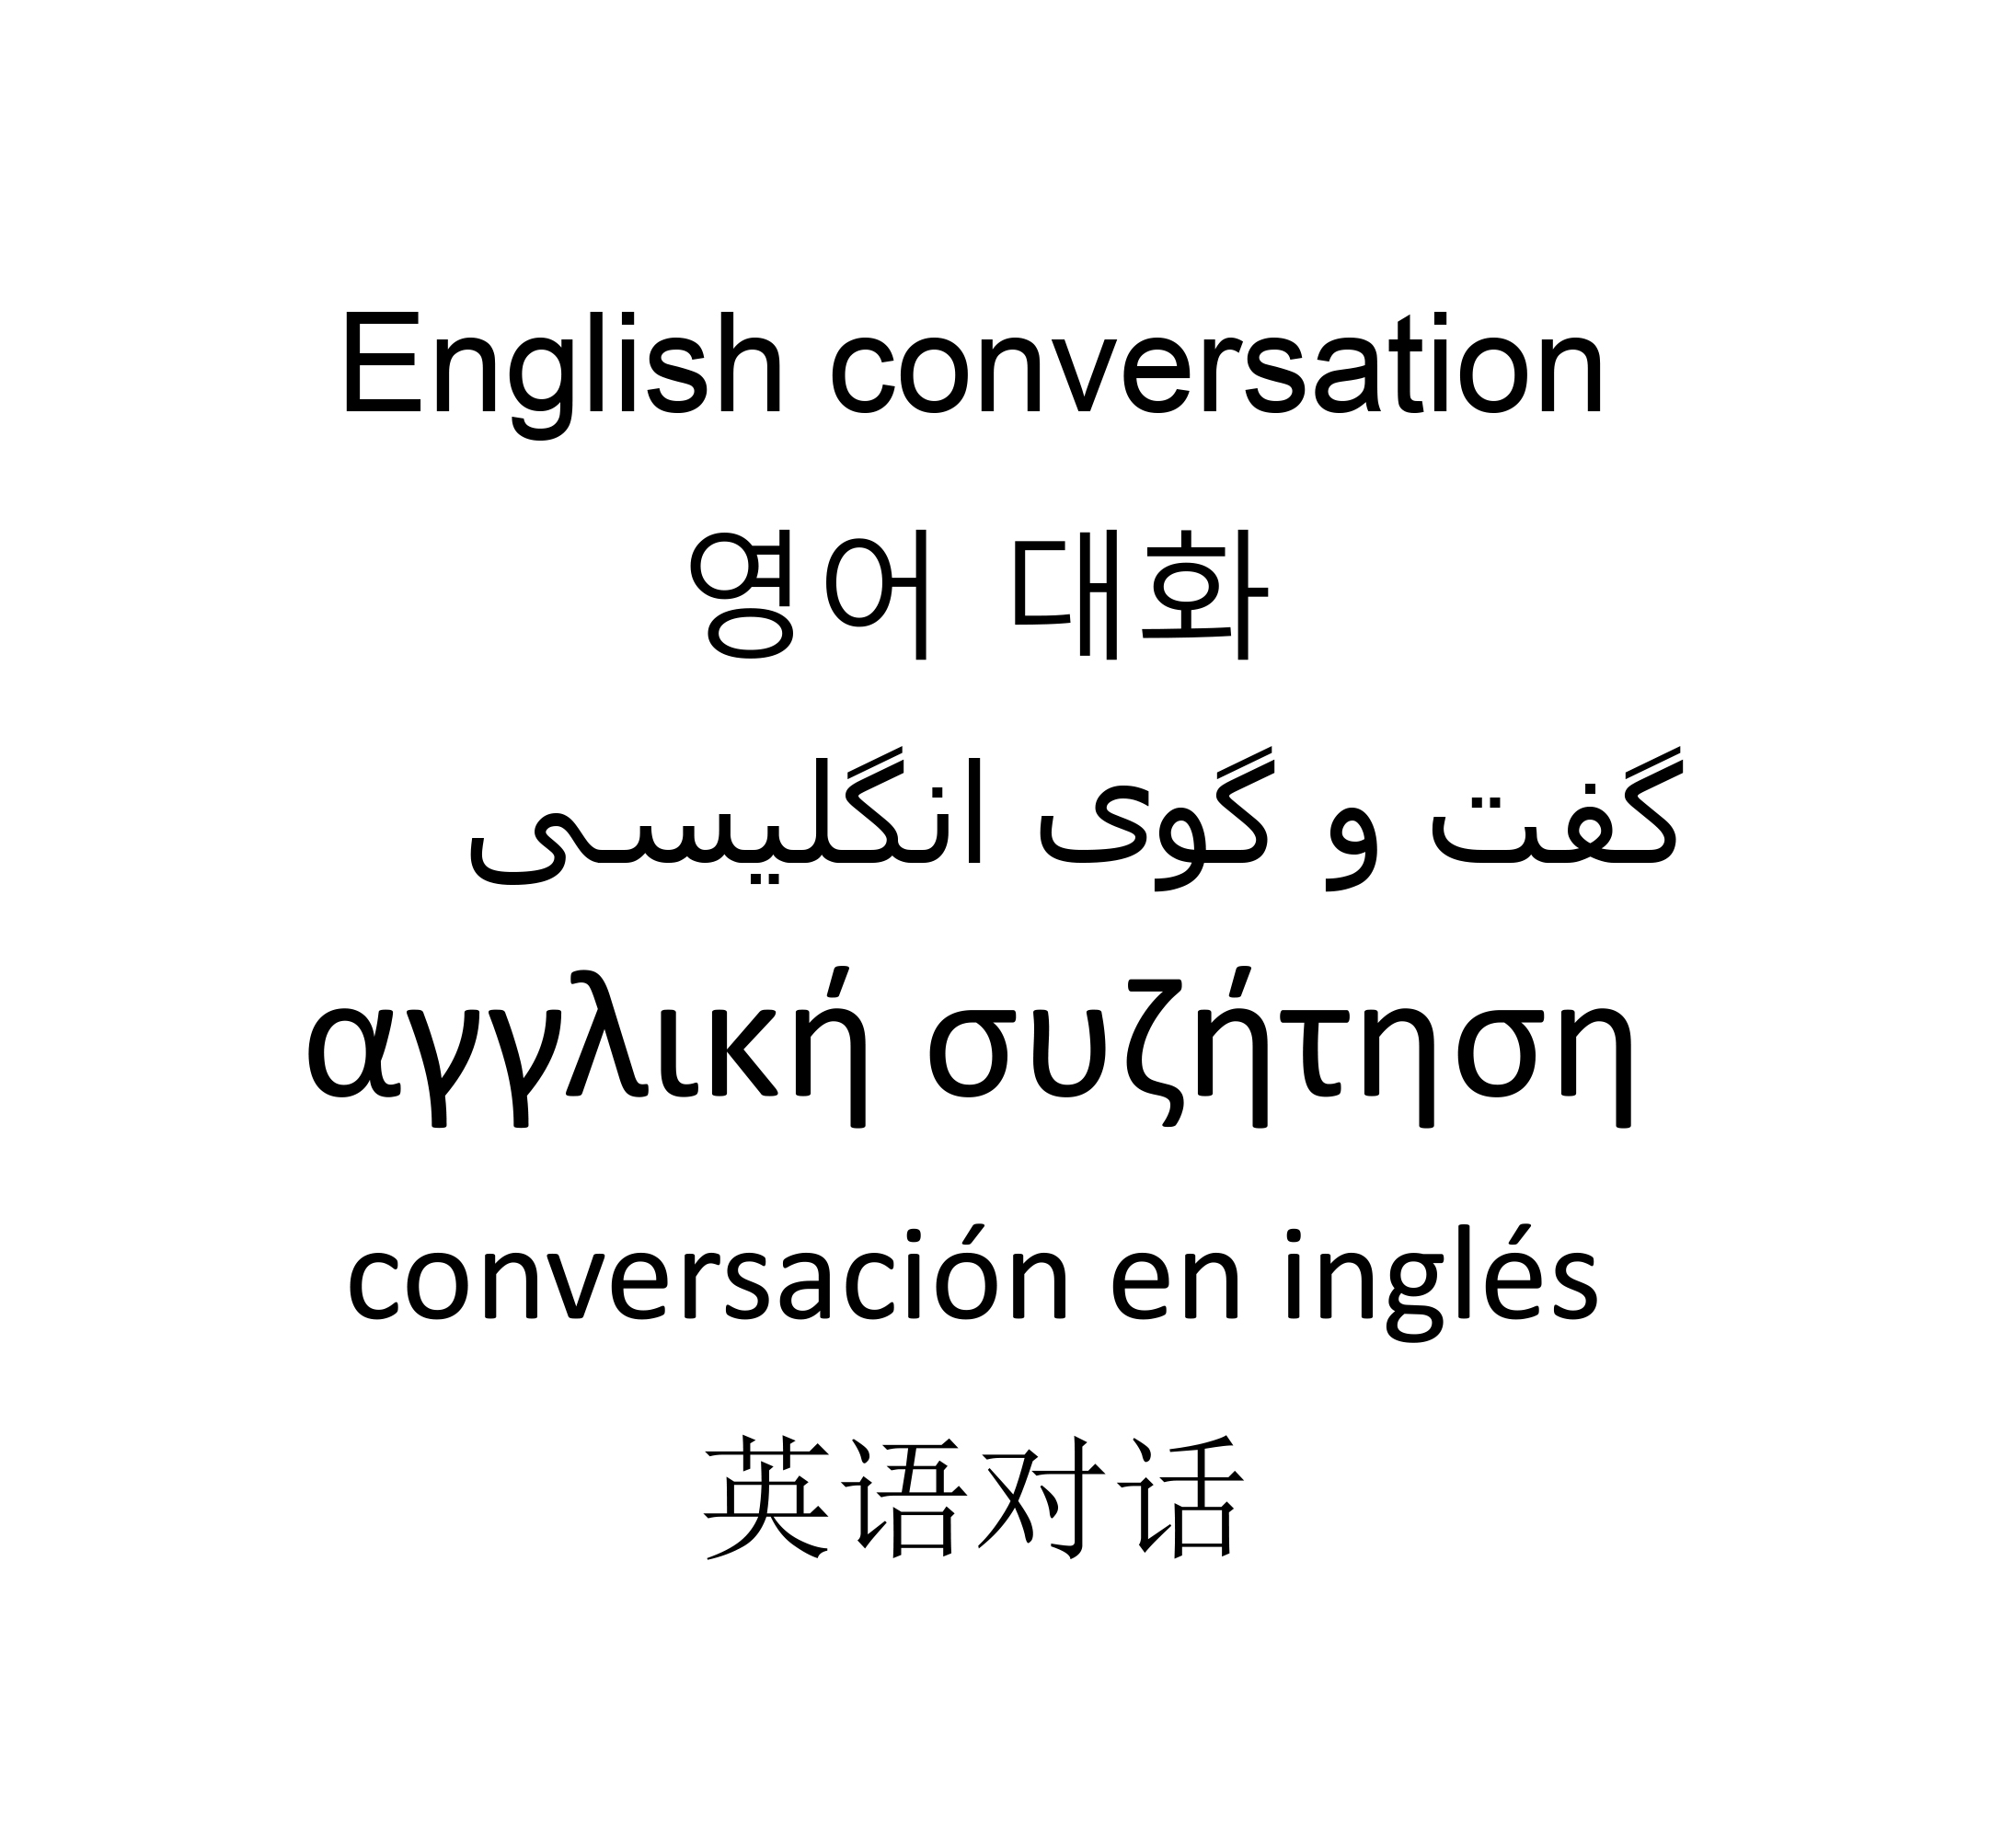 English conversation classes (recommencing soon)